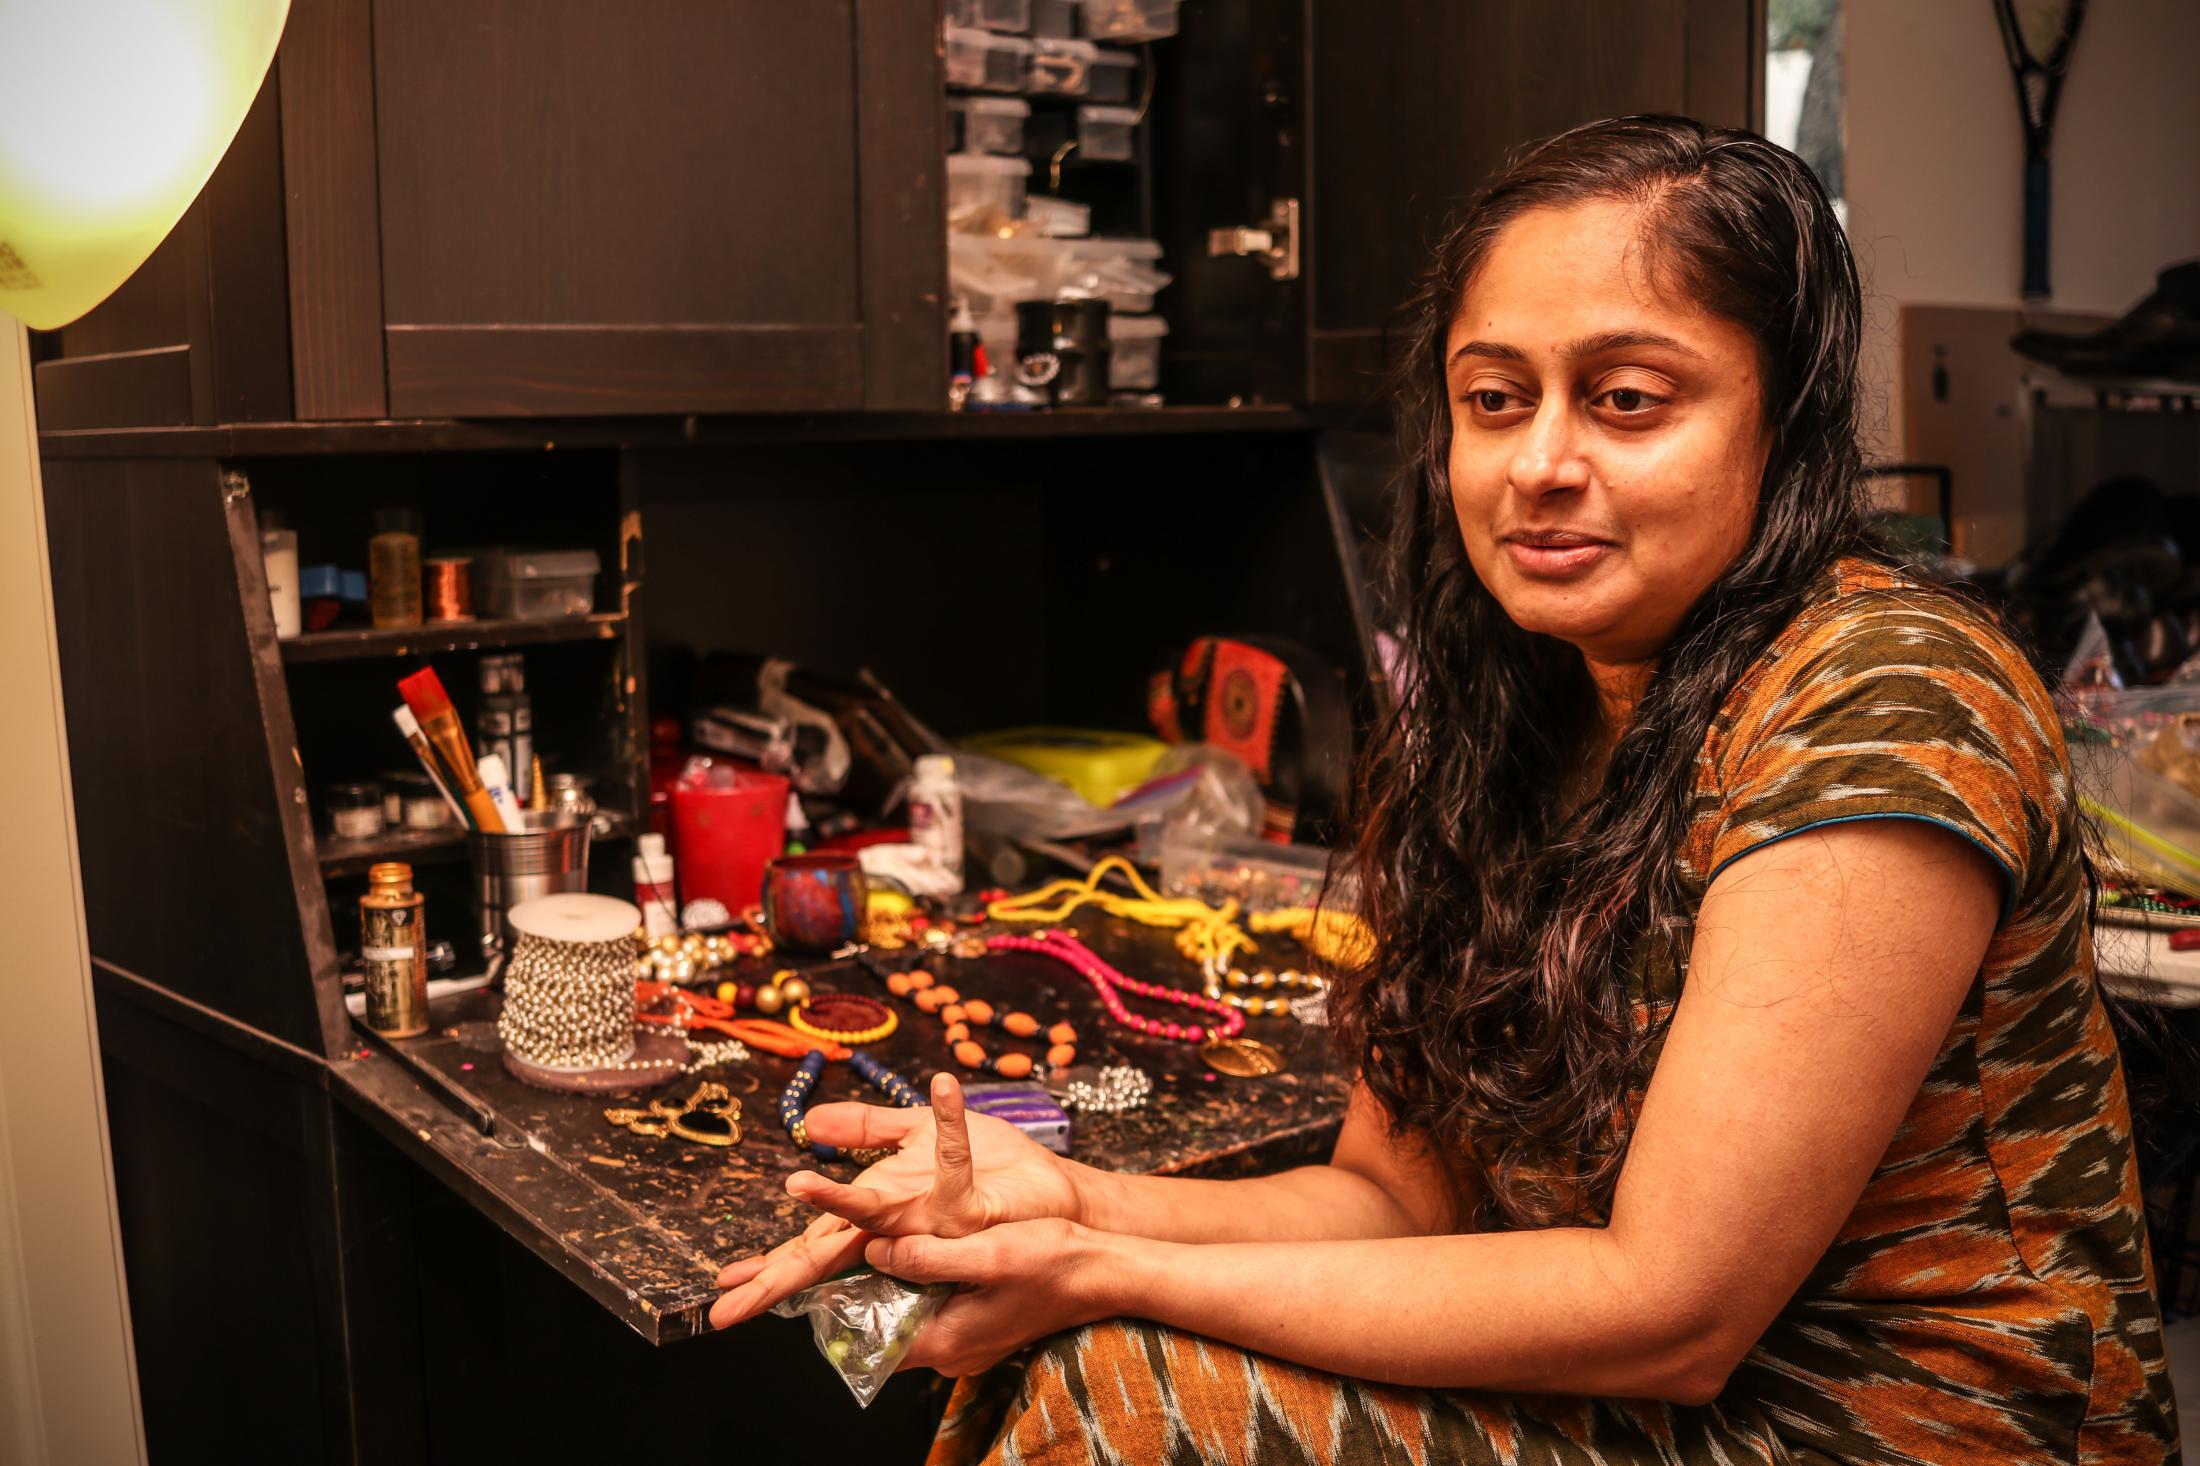 Vani Haridas talks about her passion for jewelry-making, at her residence in San Jose, Calif., on Saturday, Dec 14, 2019.